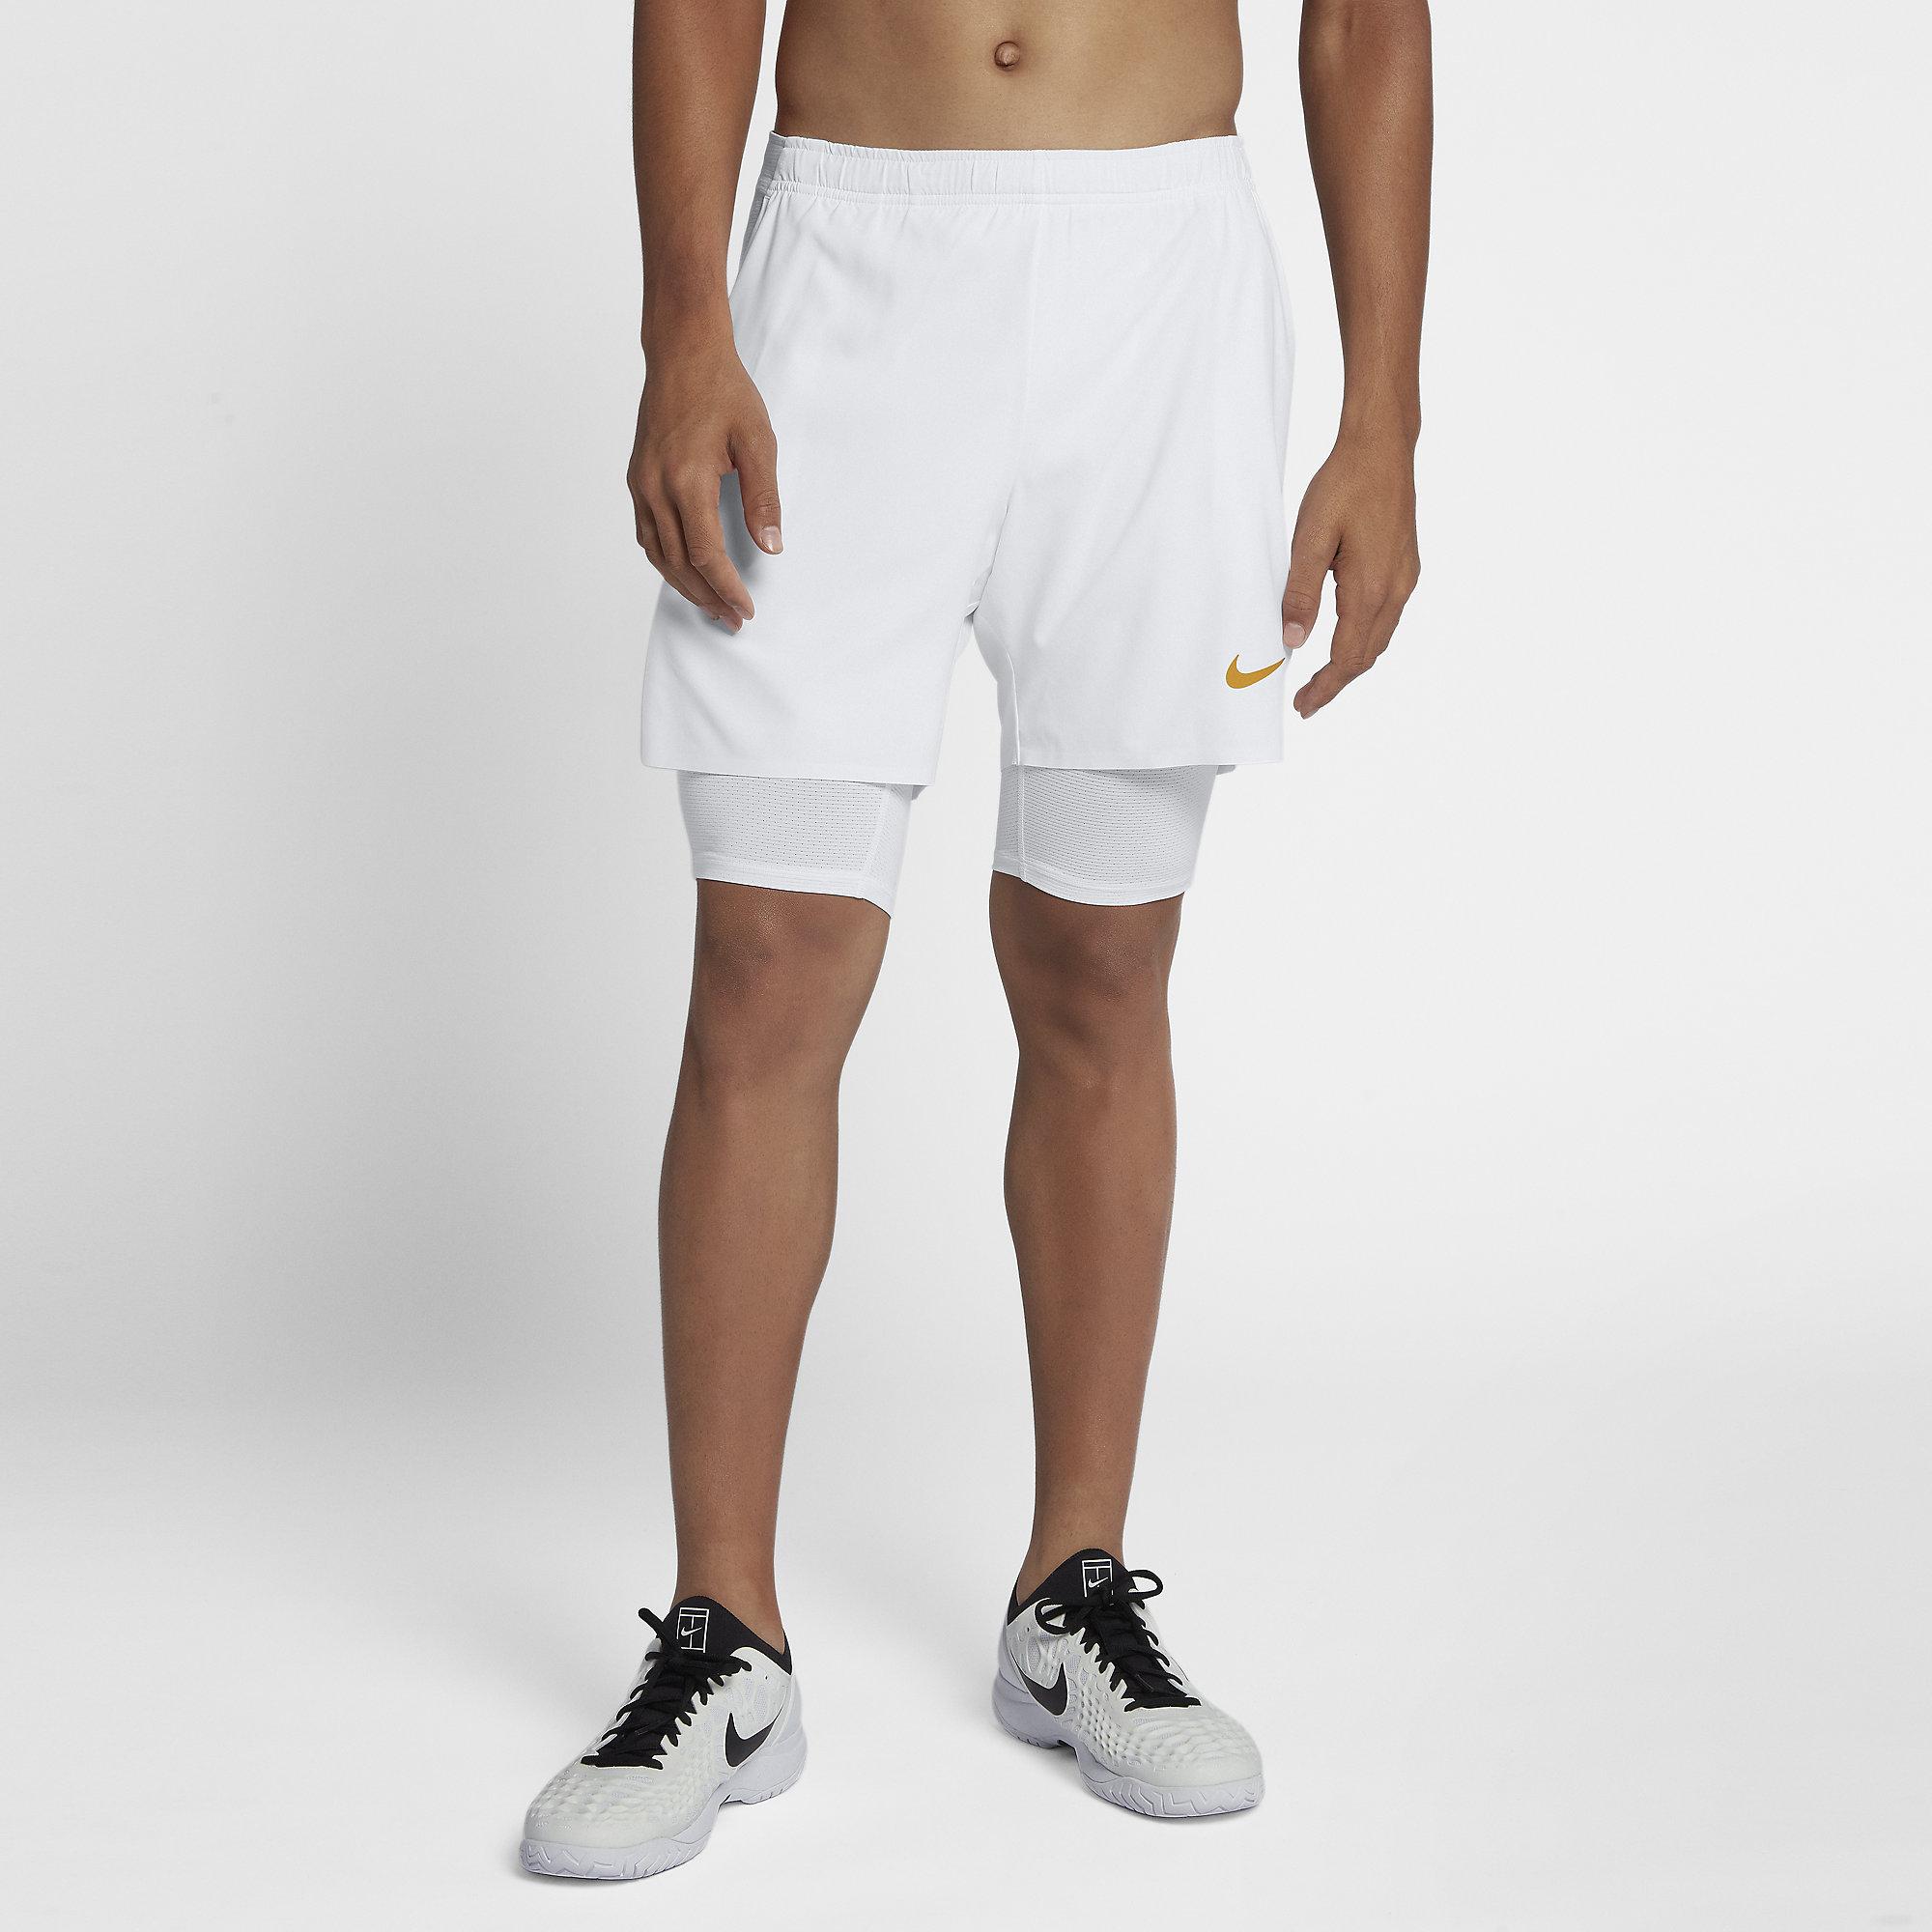 Nike Mens Flex Ace 7 Inch 2-in-1 Tennis Shorts - White/Gold ...